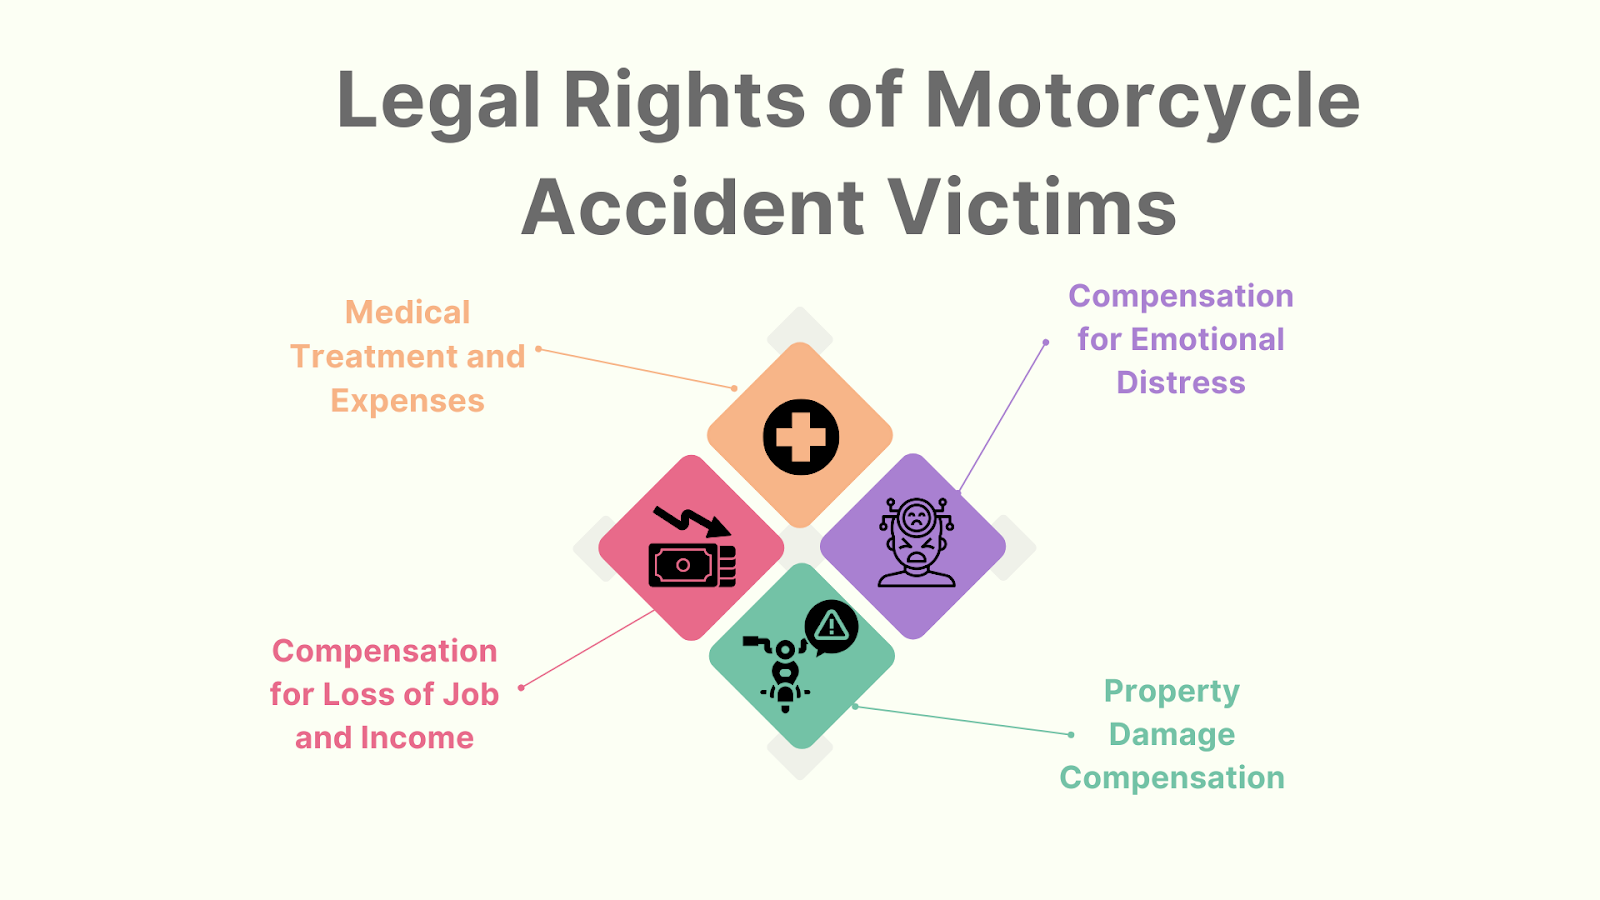 Legal Rights of Motorcycle Accident Victims